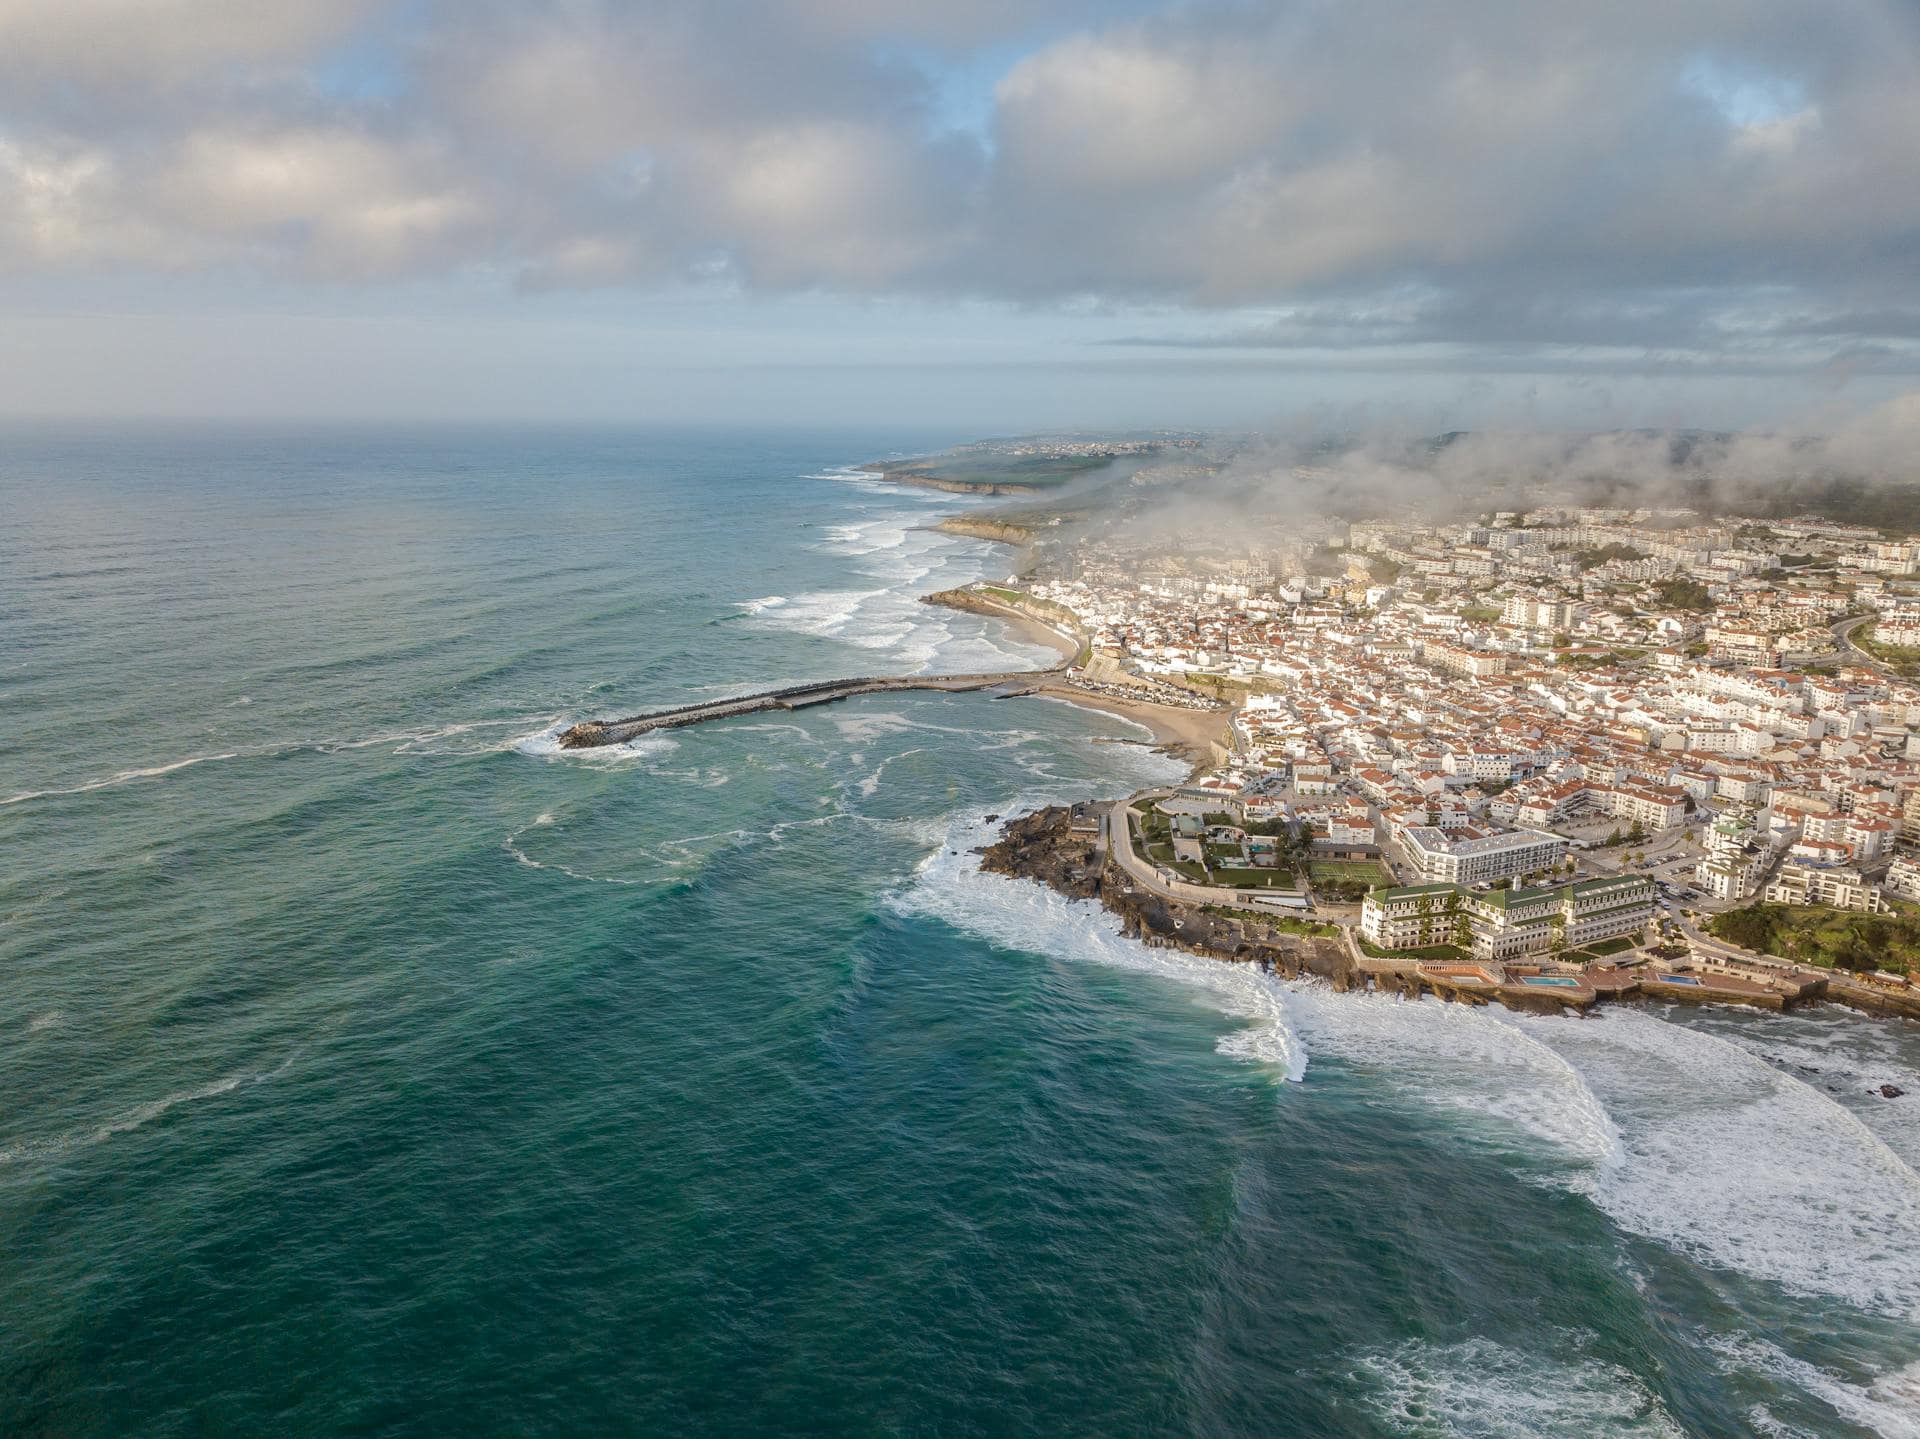 Best things to do in Ericeira Portugal - Rachel Covert - View of the city from above by Octavio Scholz on Pexels